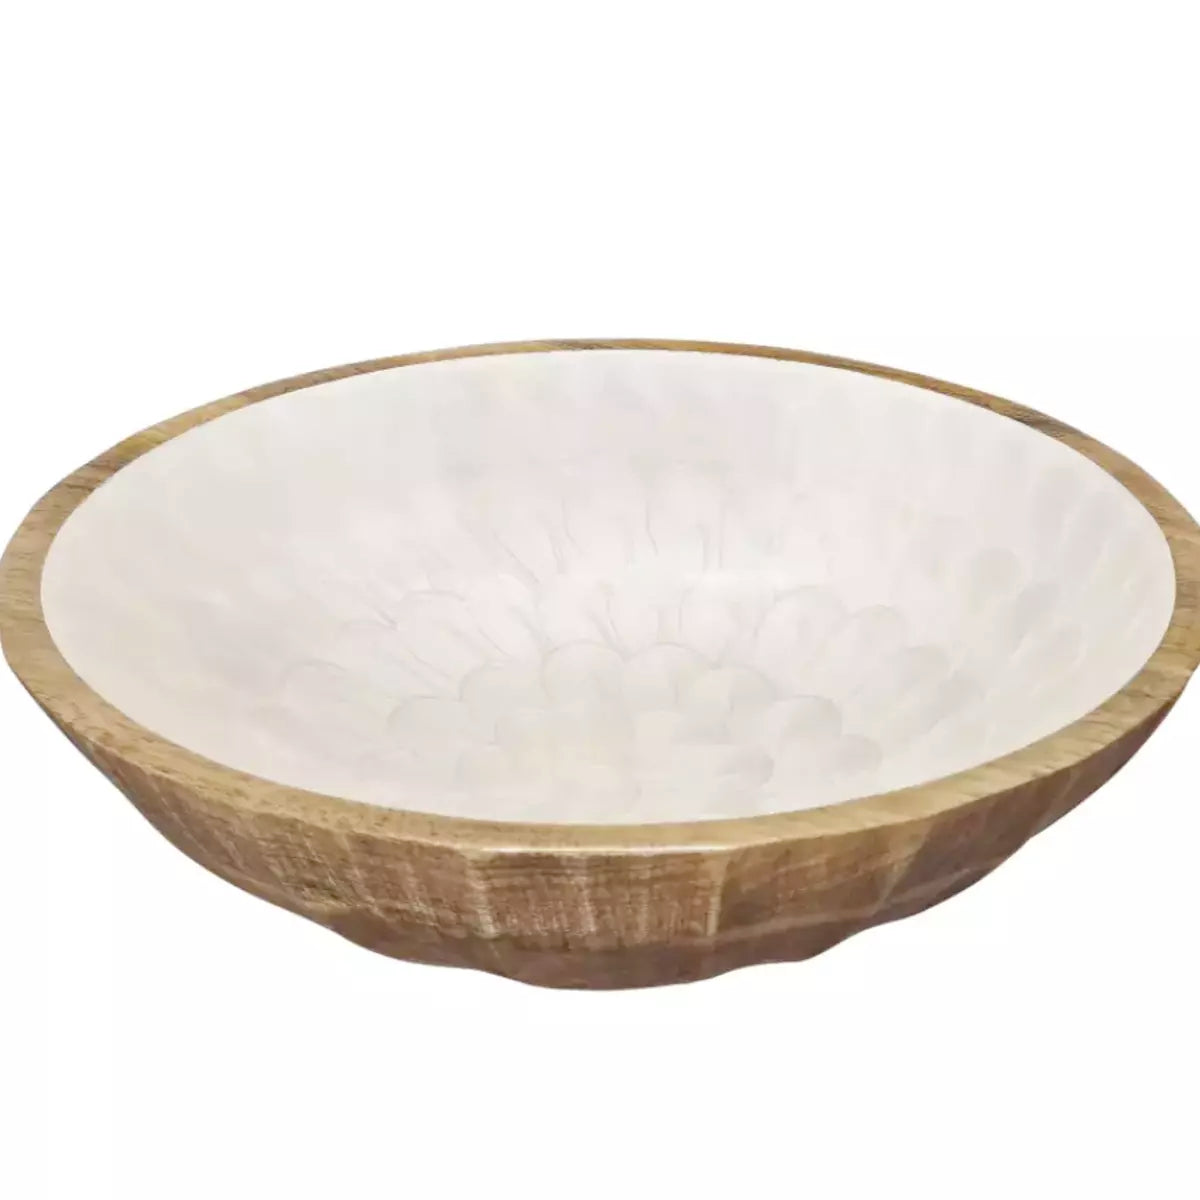 The j.elliot Como Salad Bowl is a white bowl with an embossed pearl design and a wooden rim.